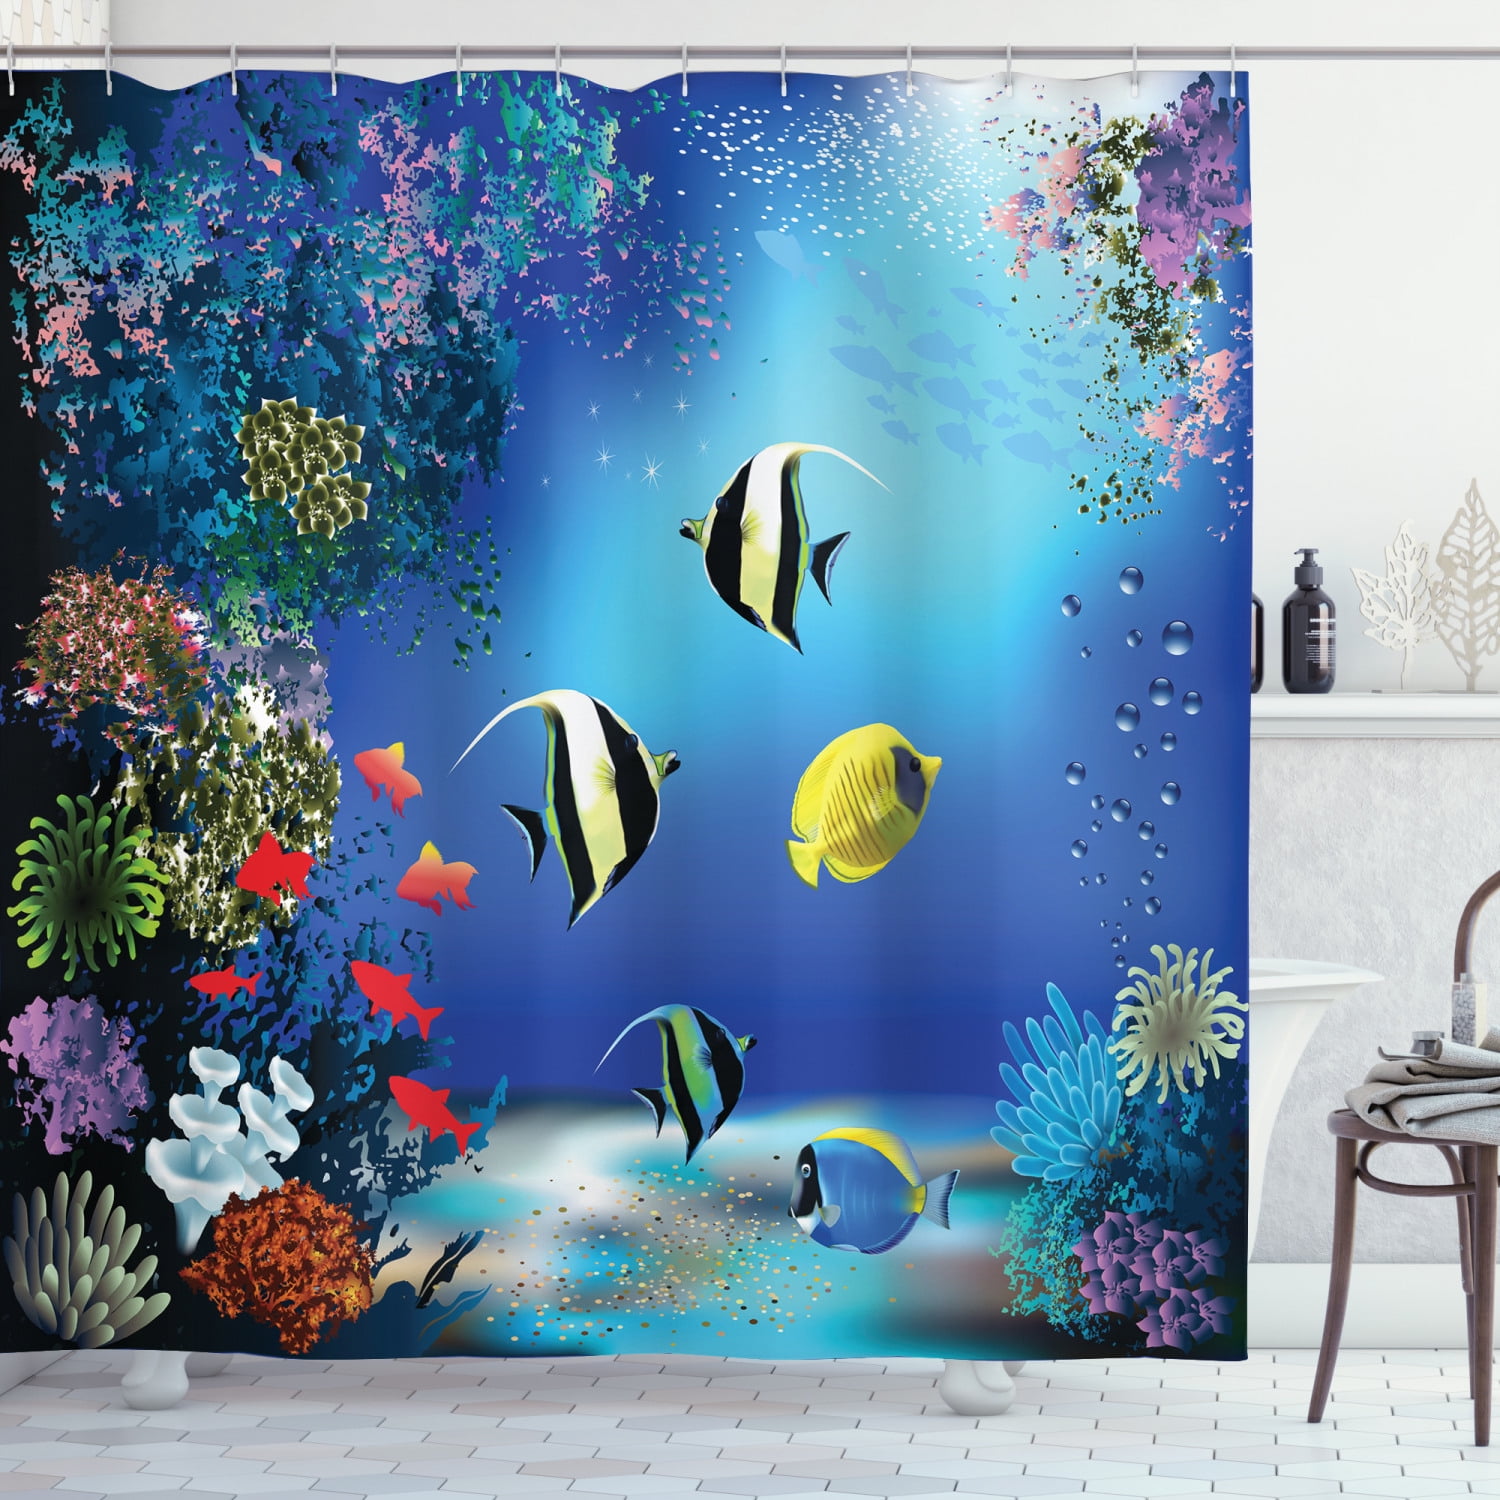 72/79" Fabric Shower Curtain Set Big Jellyfishes and Diver in Fantasy Underwater 